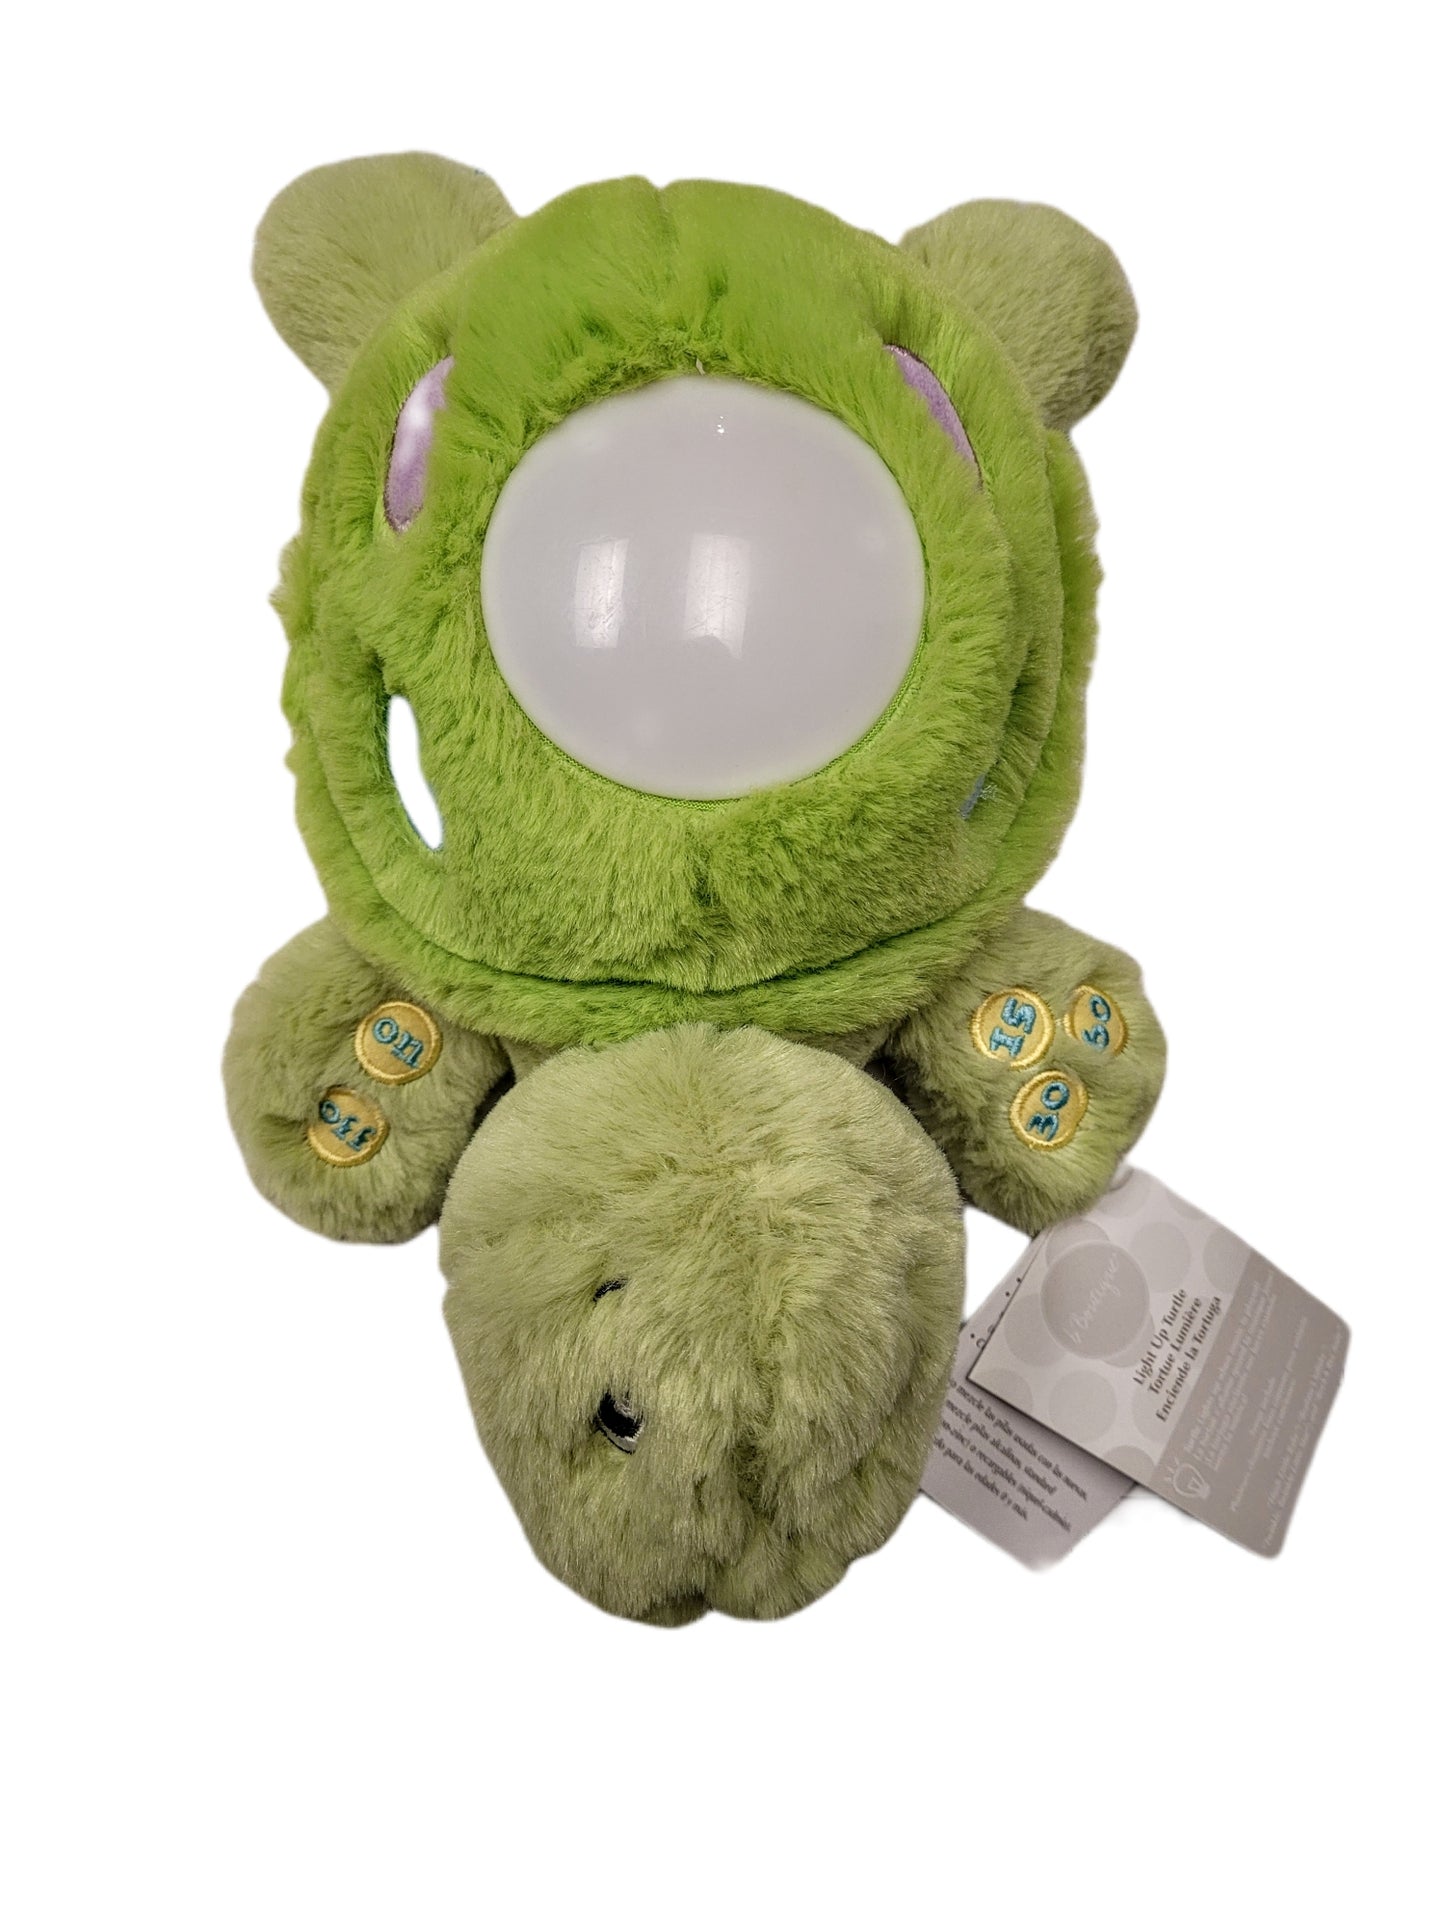 Light up Musical Turtle  Turtle lights up when music is played! features timer to play music for 15, 30, or 60 minutes Songs include Hush Little Baby, Braham's Lullaby, Twinkle, Twinkle little Star, and Rock a Bye Baby 12" long x 6.5" wide Uses 3 AAA alkaline batteries (included)